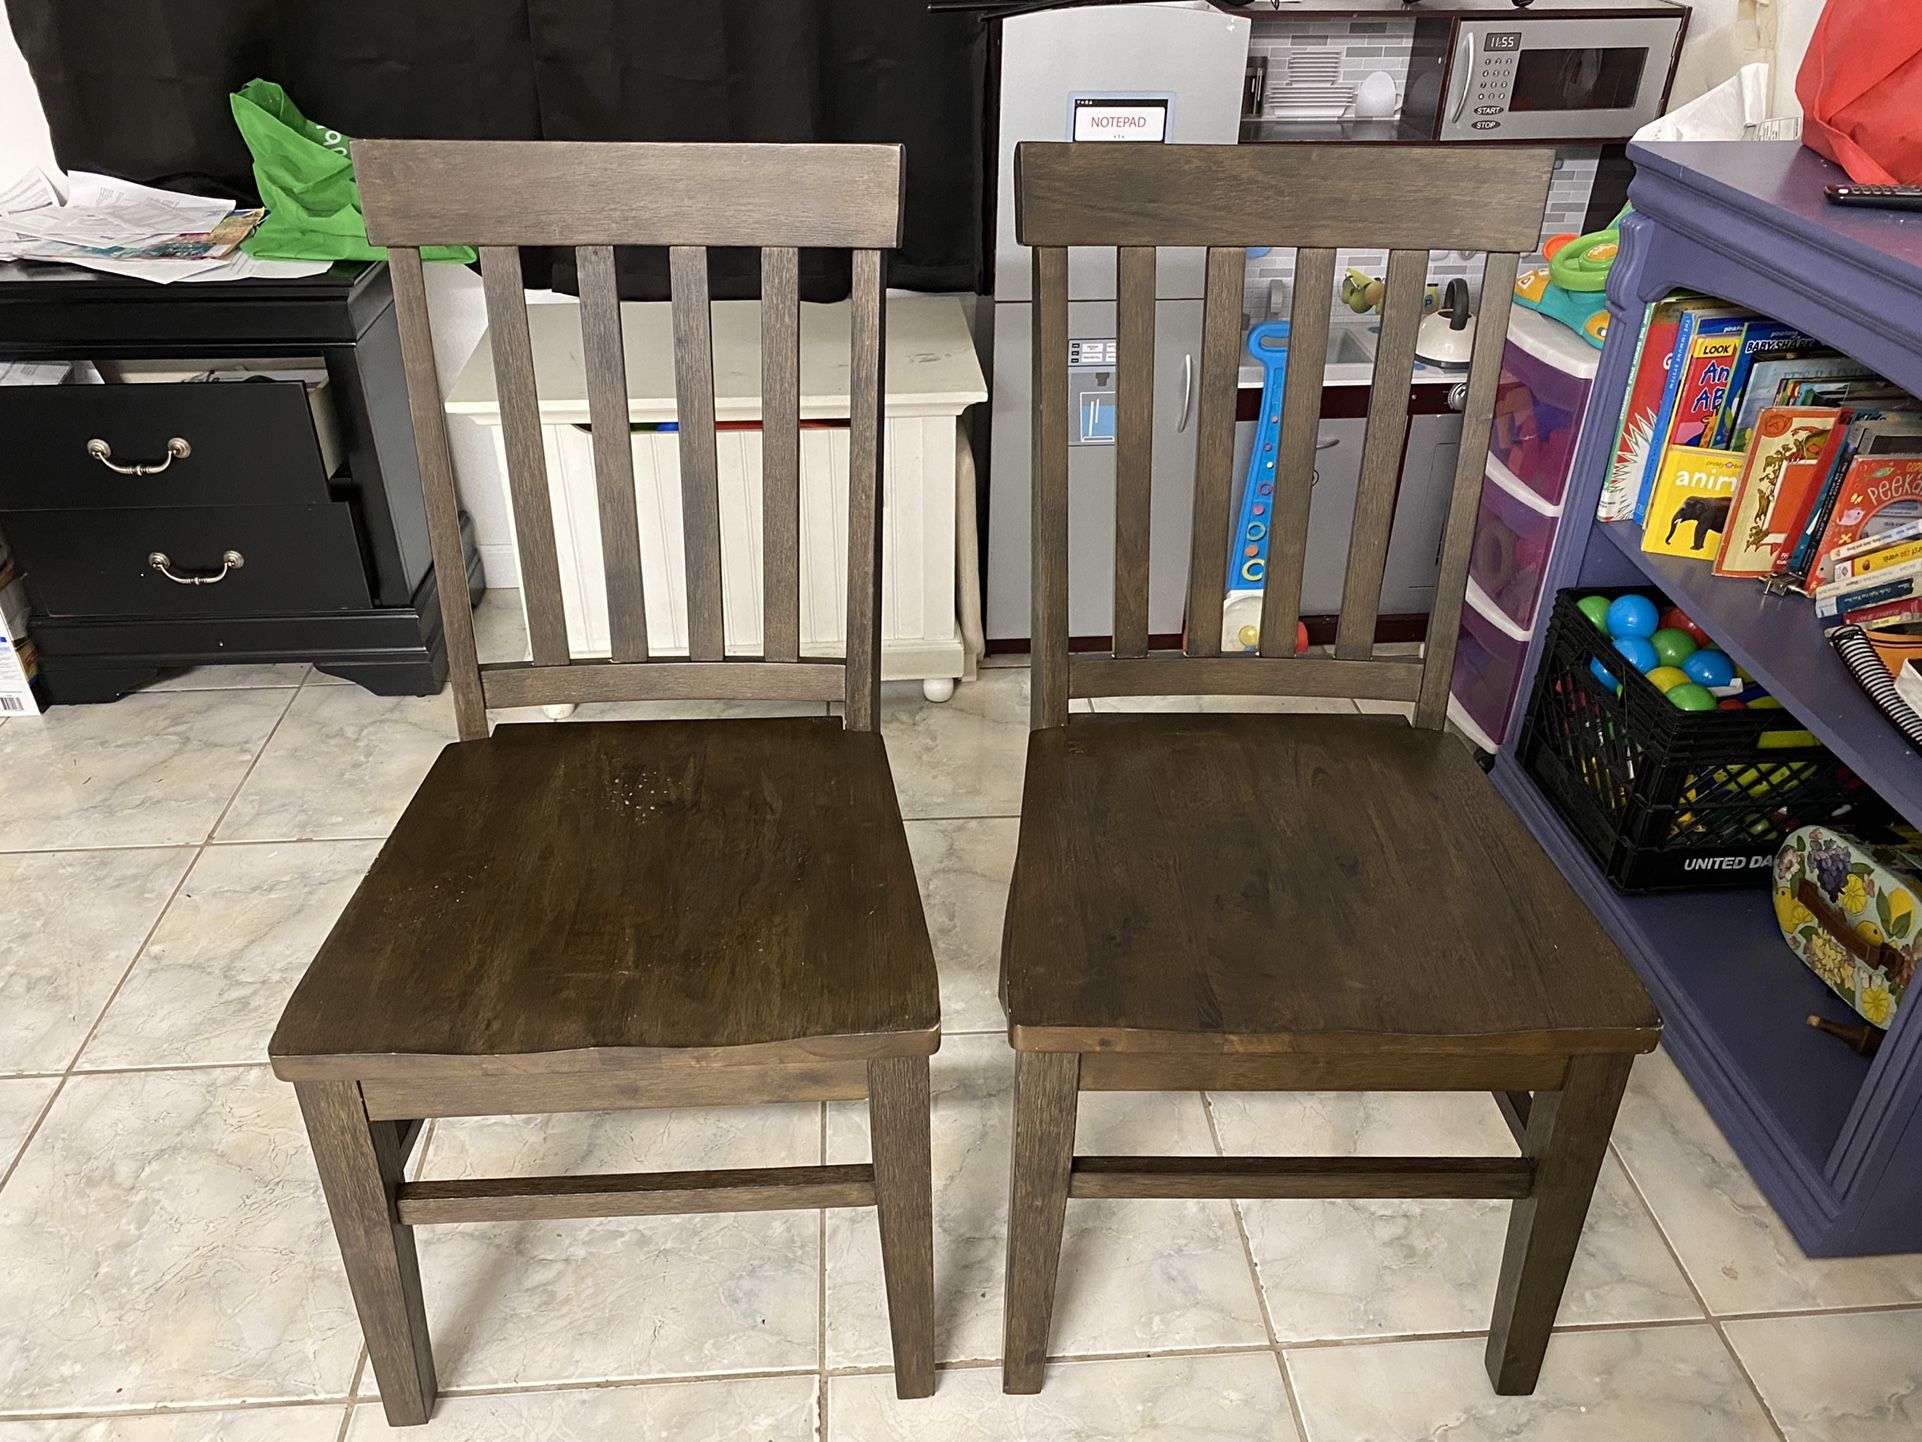 Solid Wood Chairs 